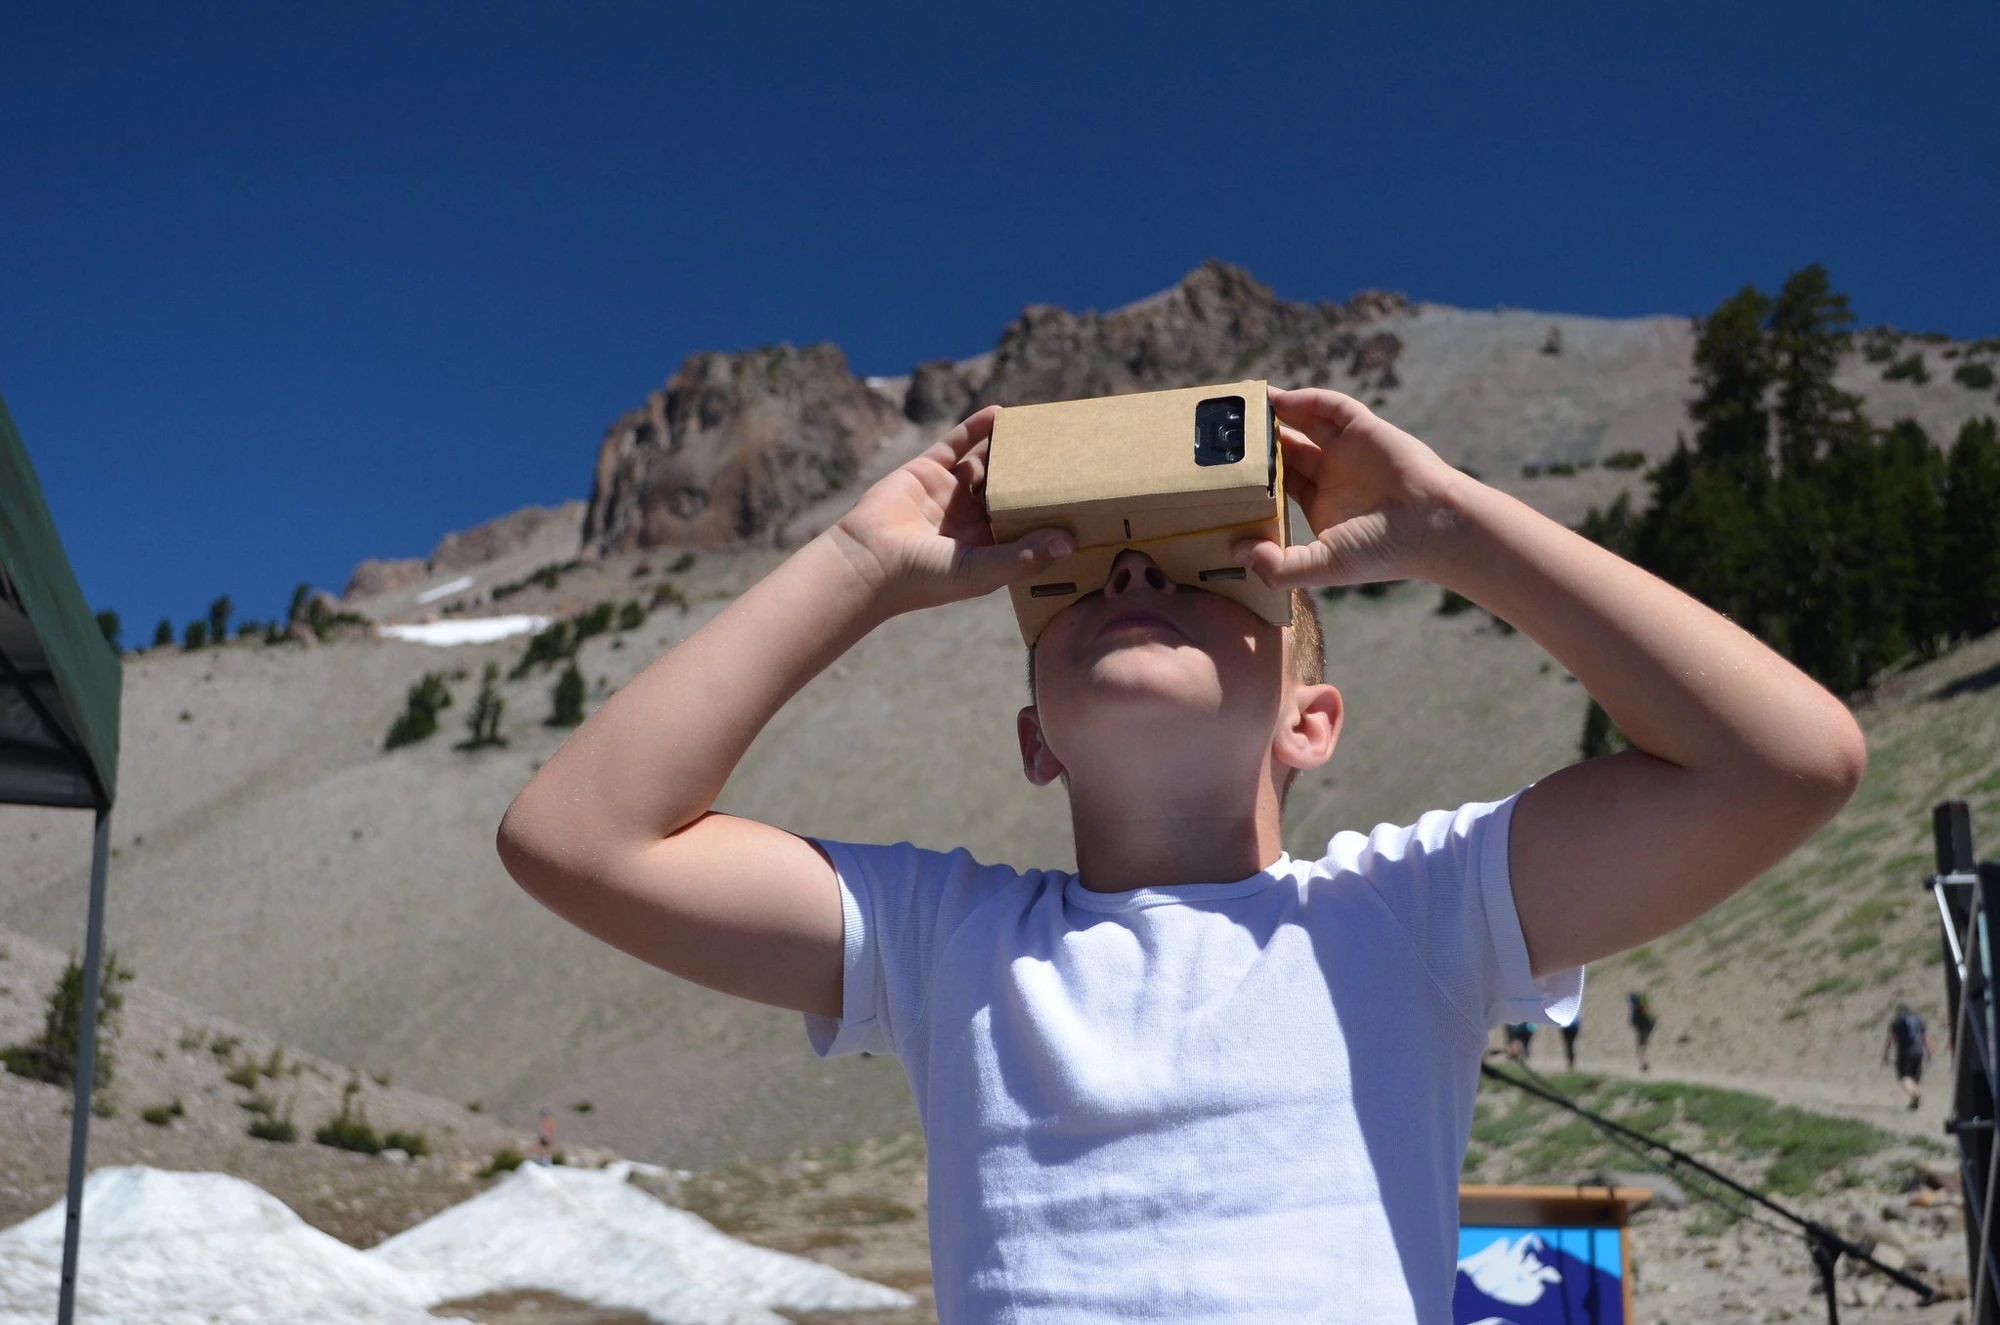 A young visitor tours the Lassen Peak summit with VR goggles. (Photo: LassenNPS / Flickr CC)